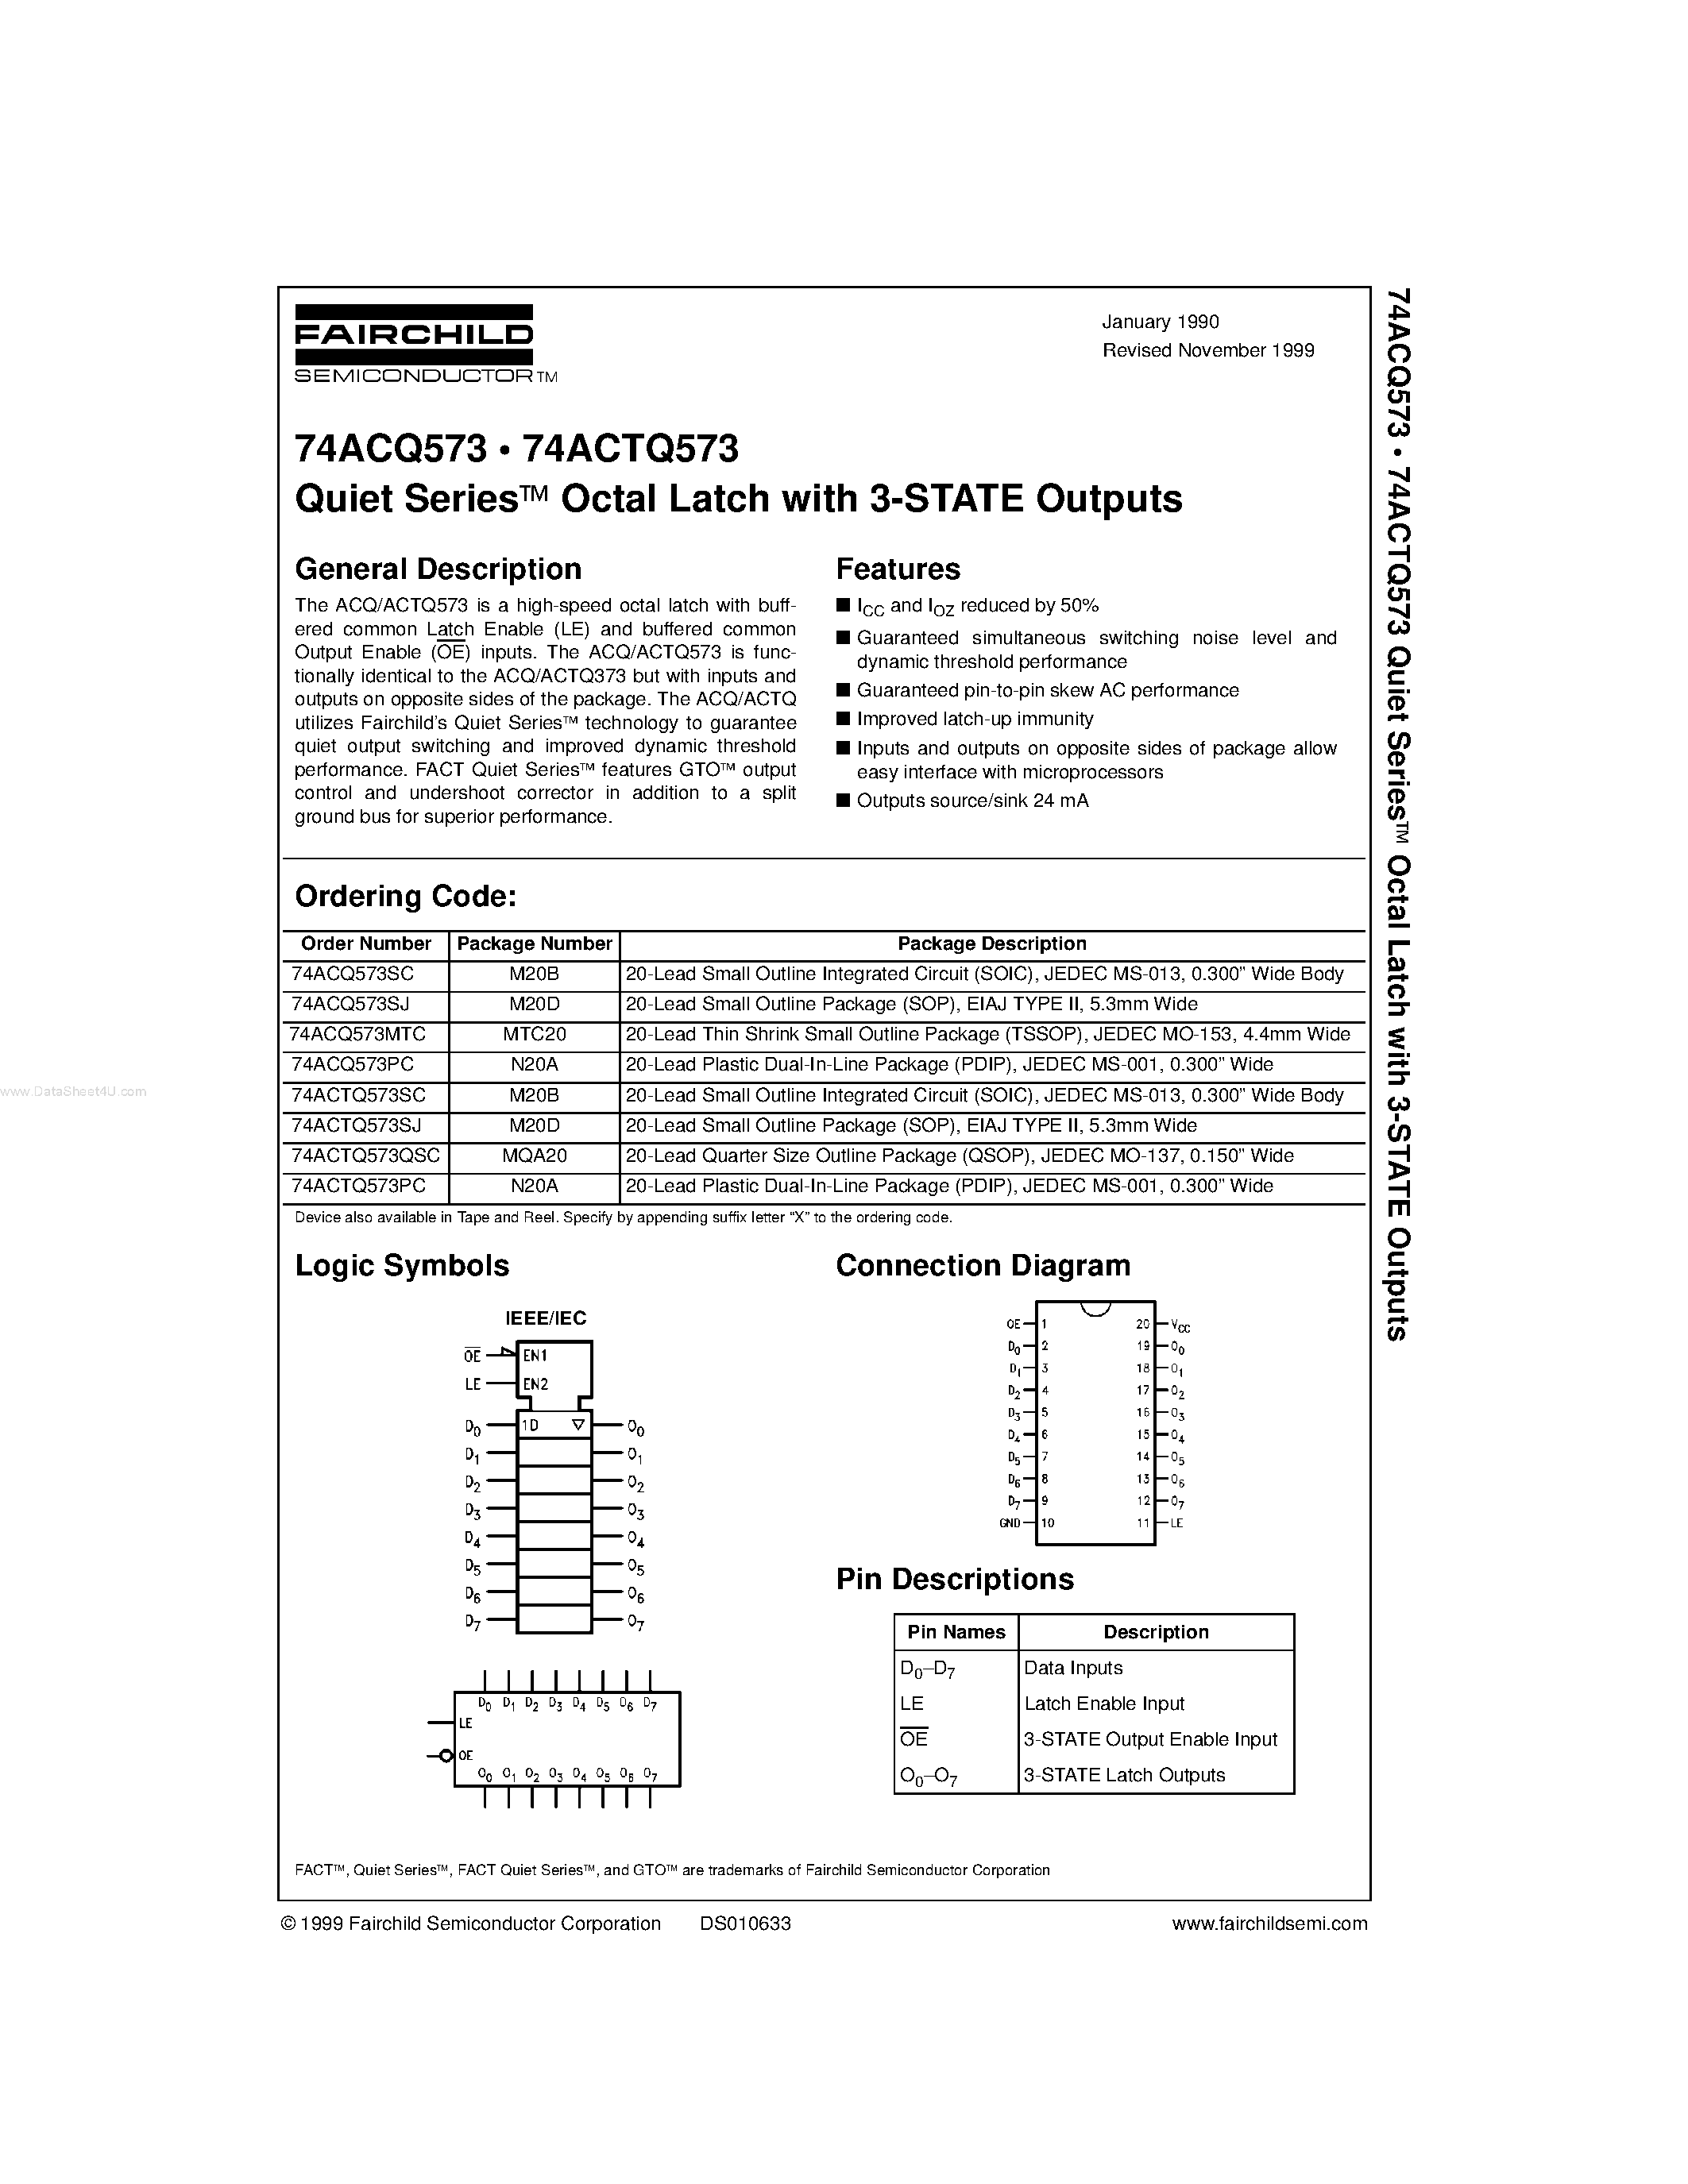 Datasheet 74ACQ573MTC - Quiet Series Octal Latch with 3-STATE Outputs page 1